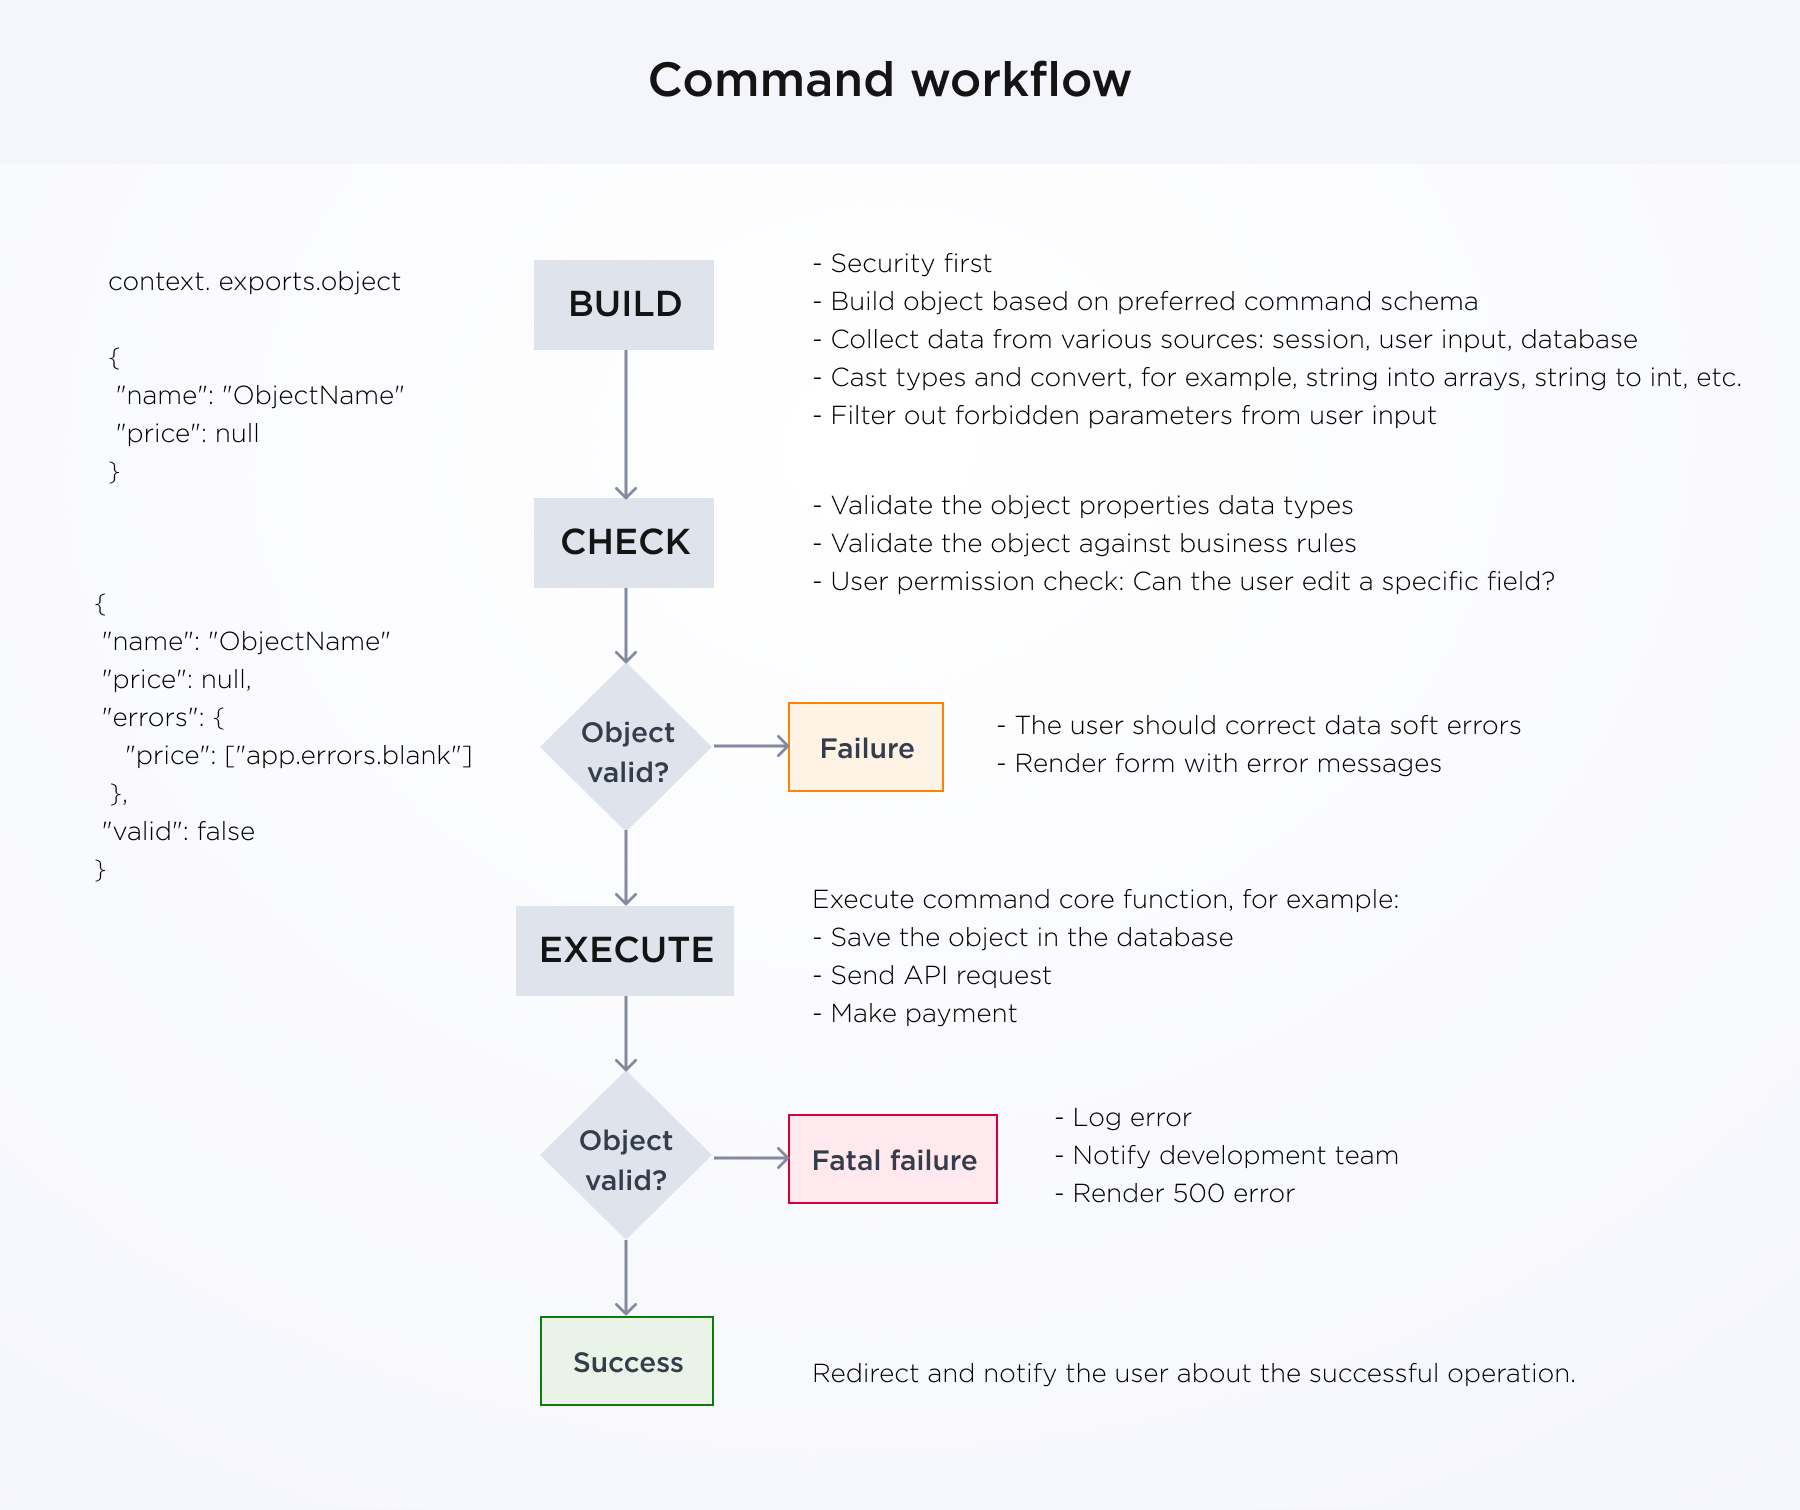 Process diagram of the command workflow - build, check, execute